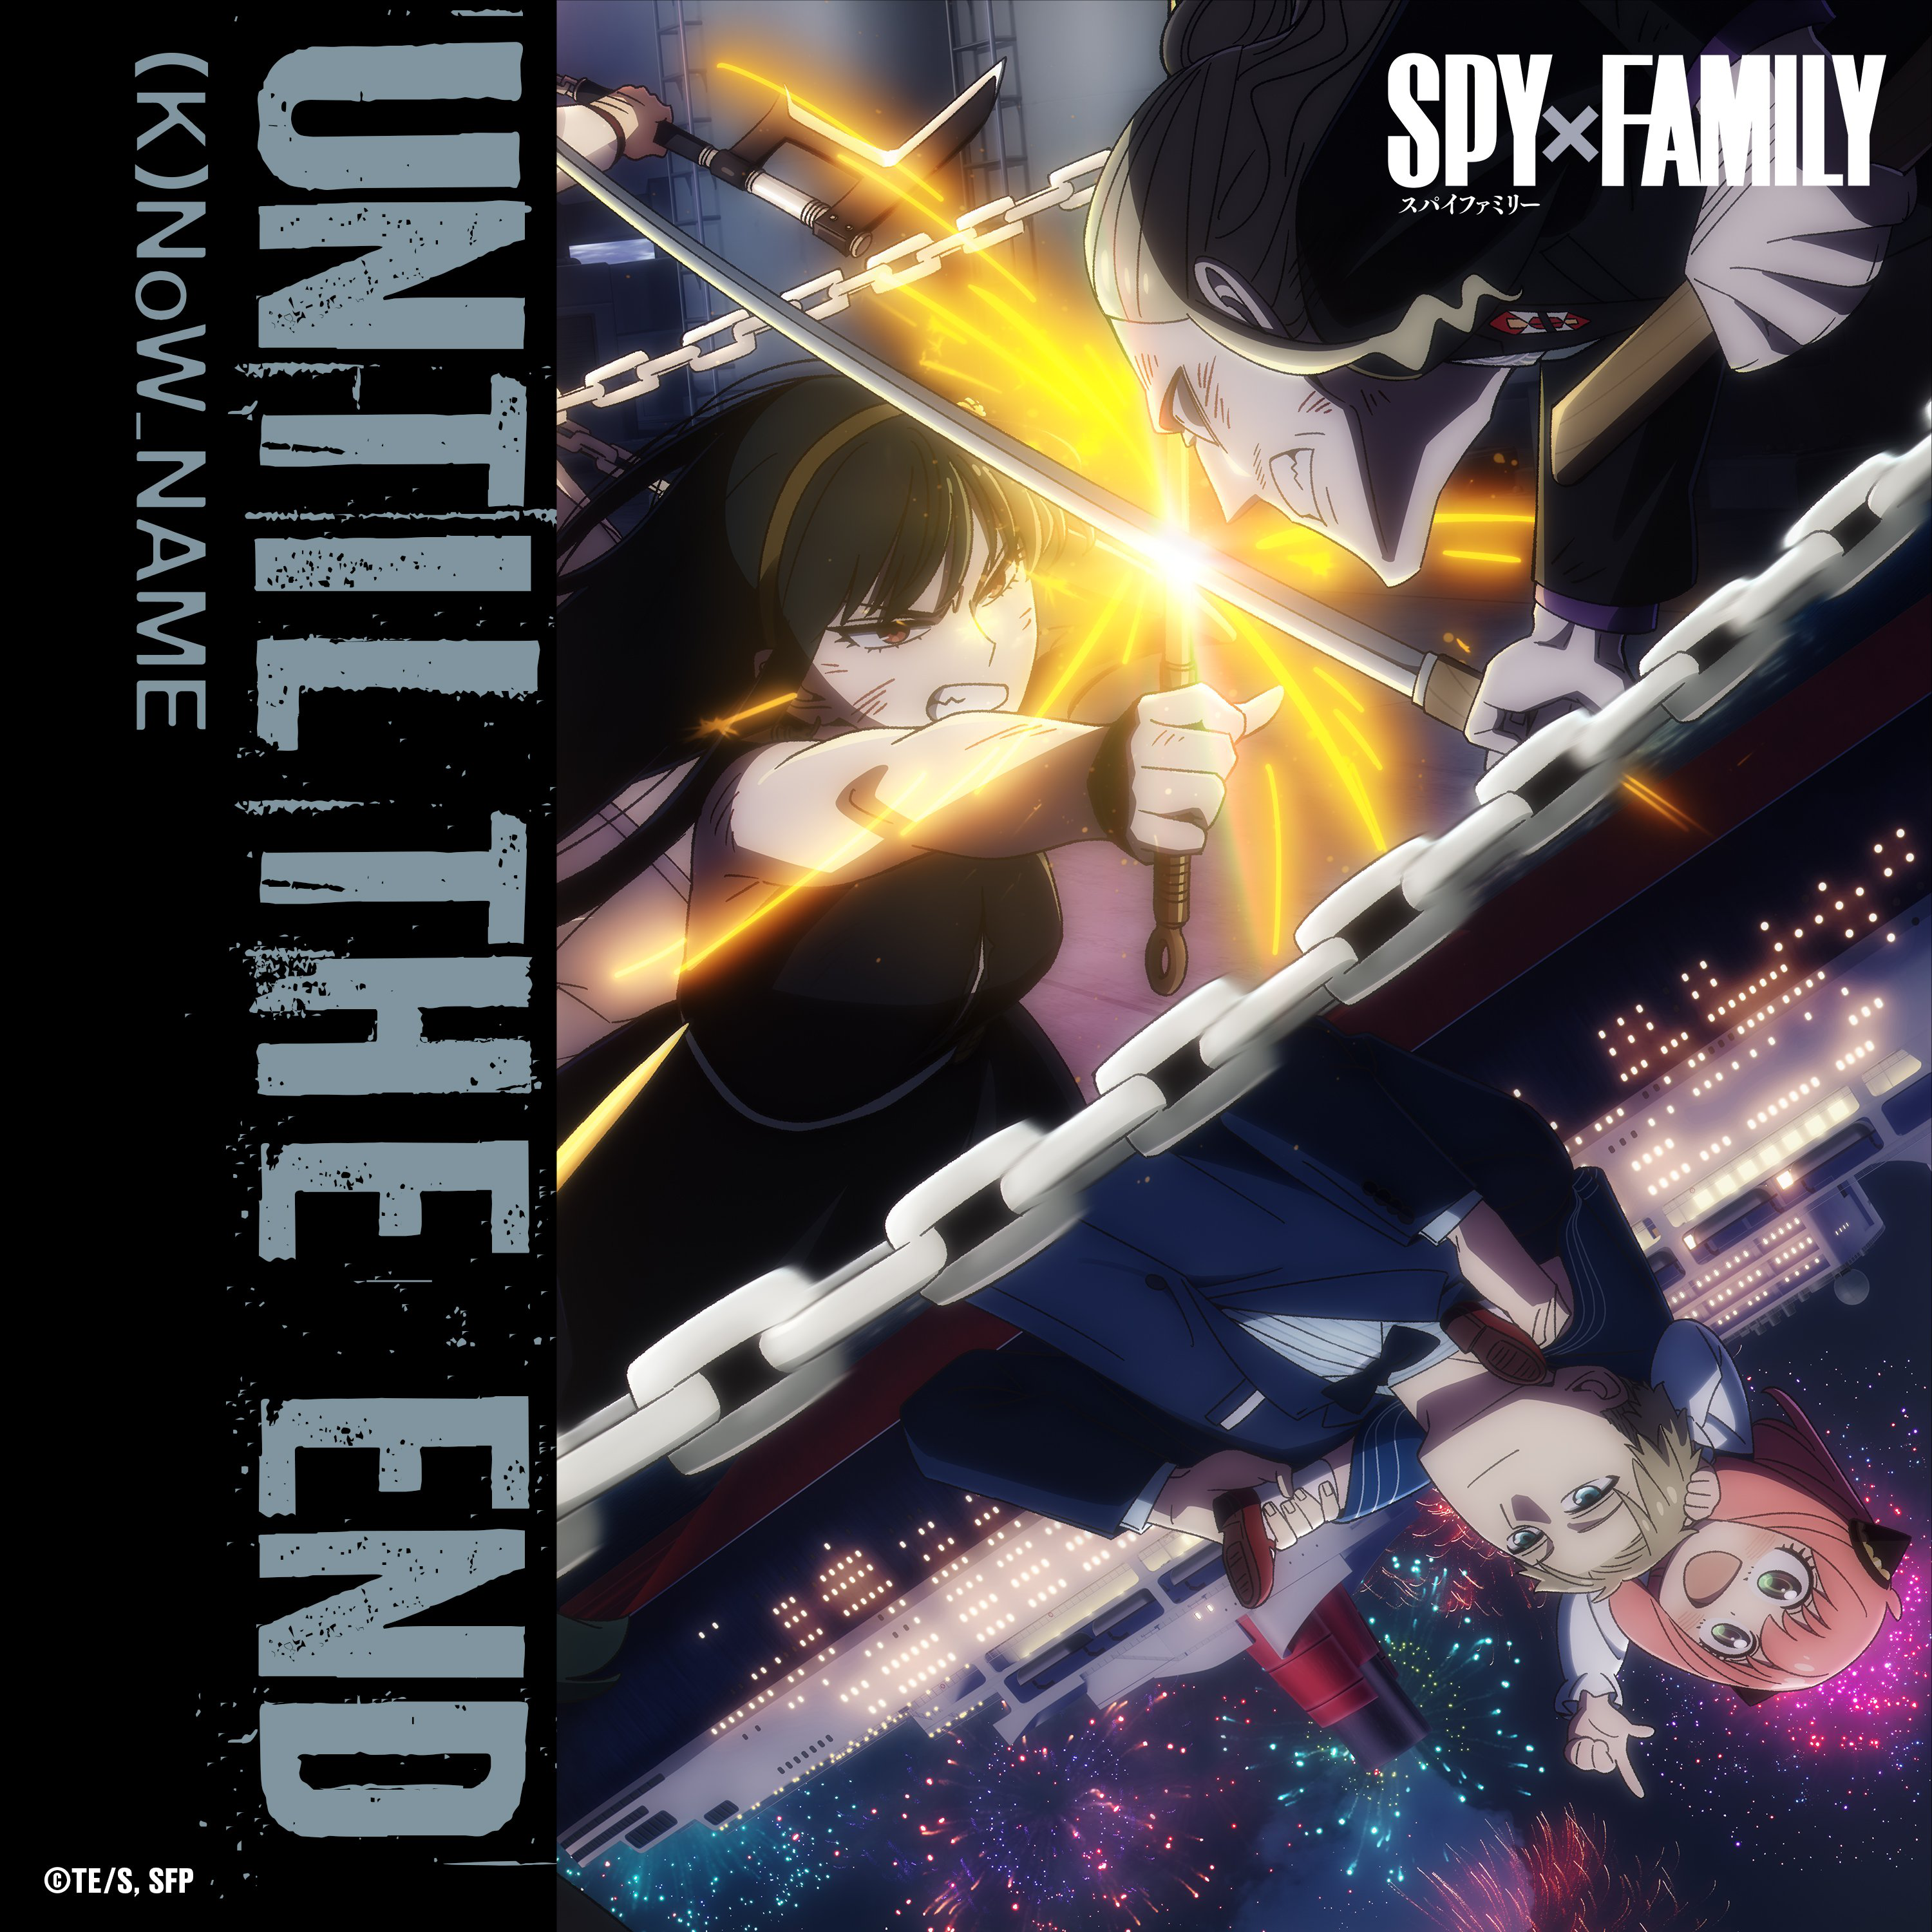 SPY x FAMILY Soundtrack Vol. 1 (Music from the Original TV Series) - Album  by (K)NoW_NAME